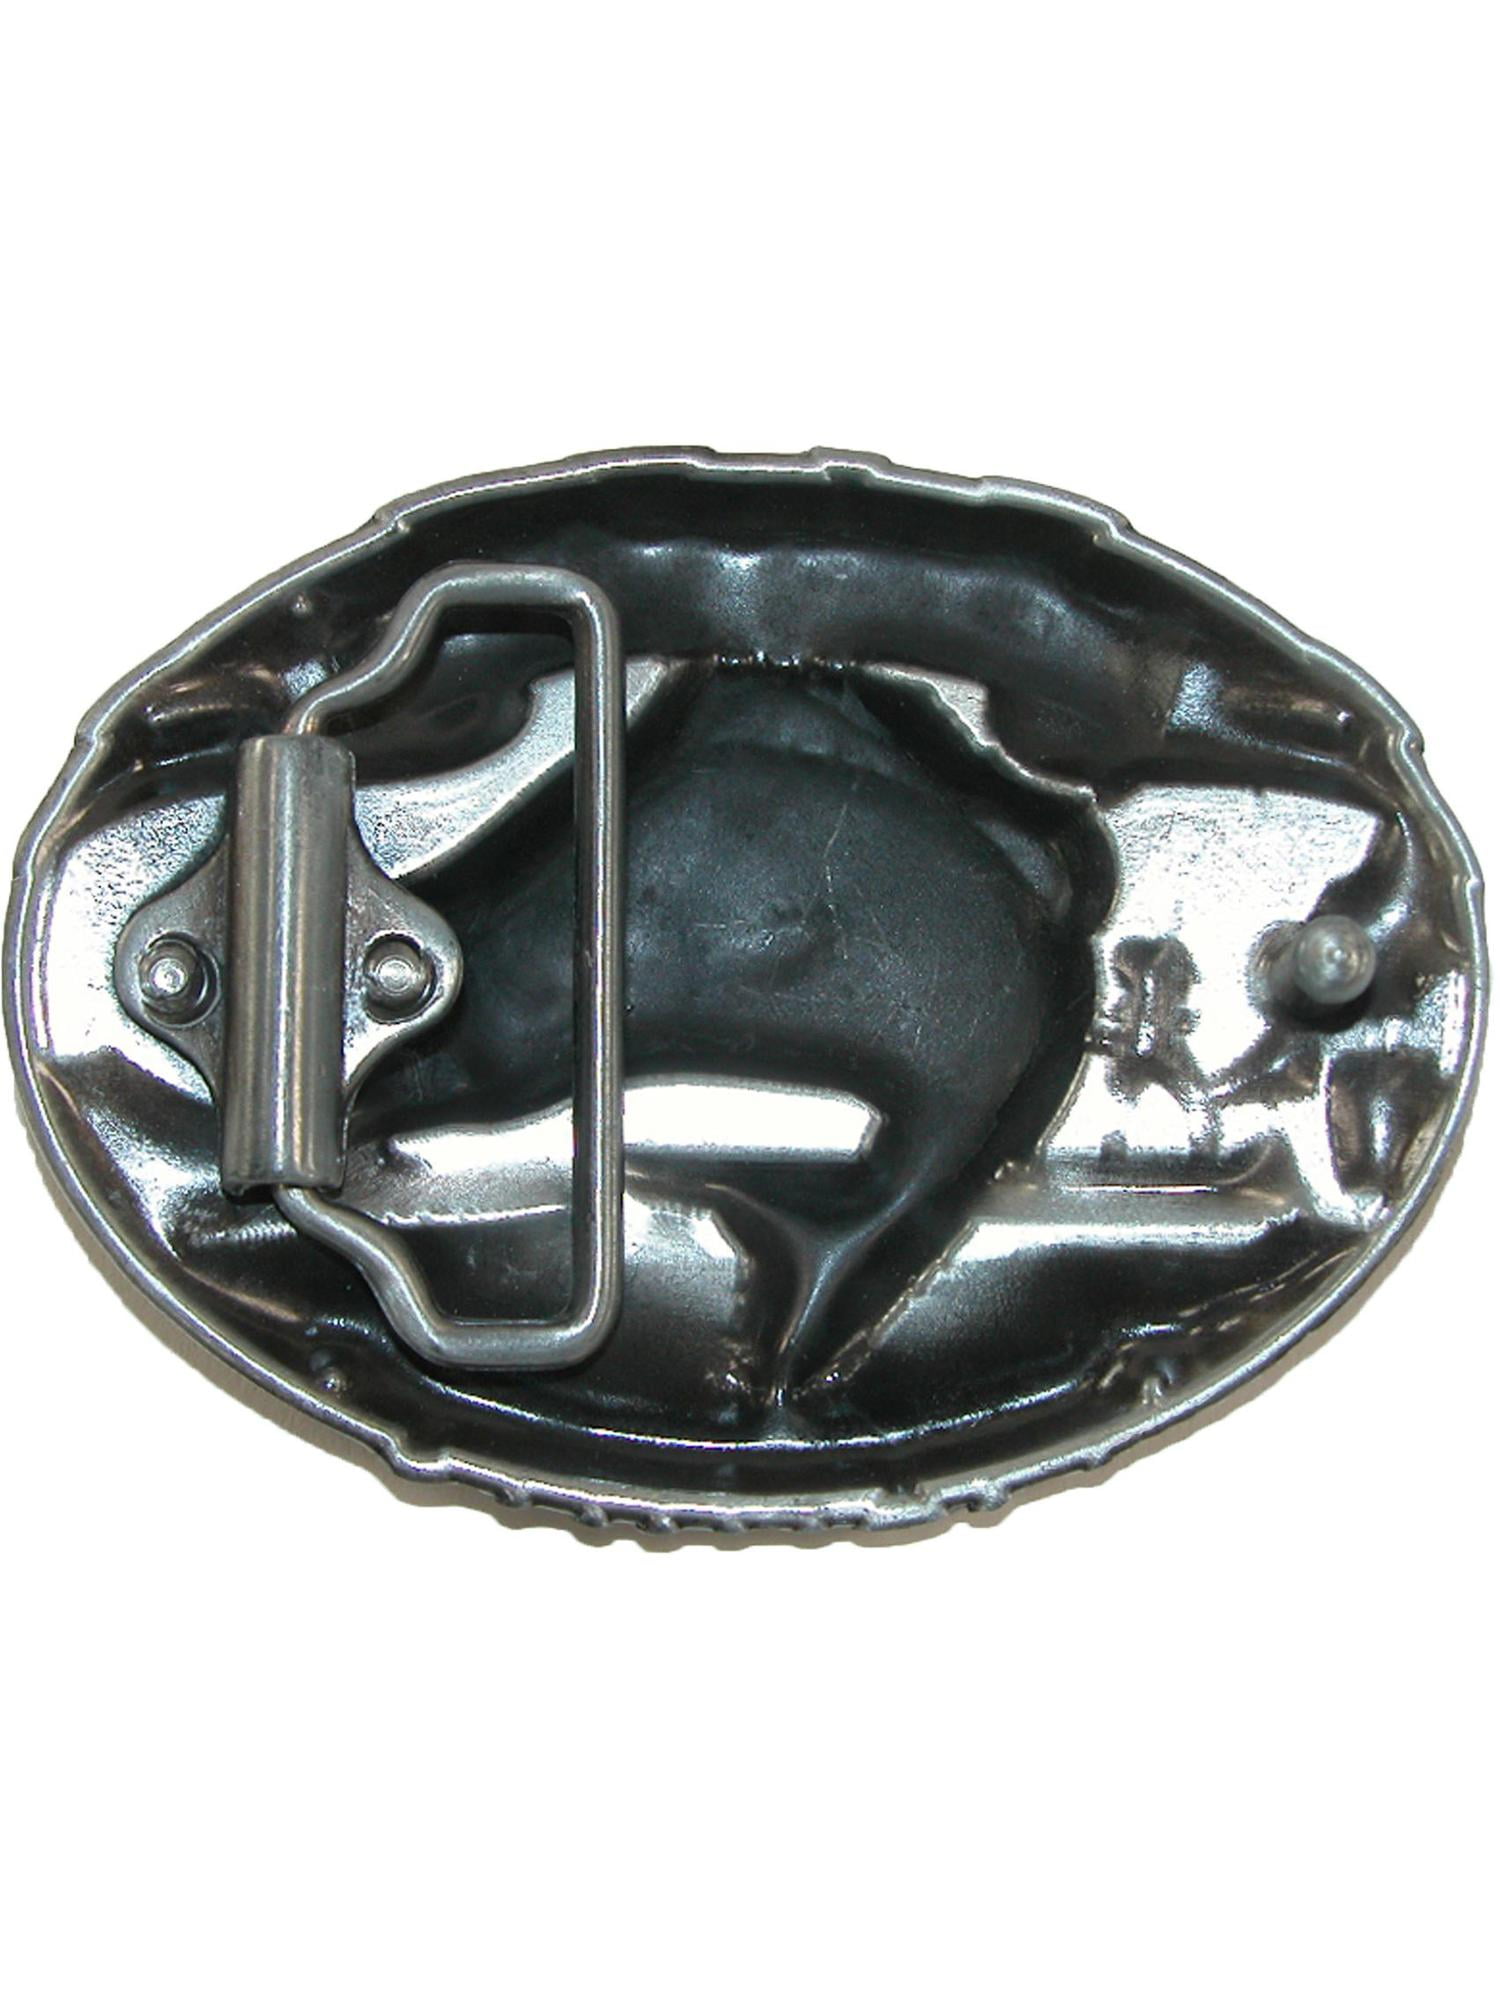 Brand NEW! Fish Mouth Belt Buckle 